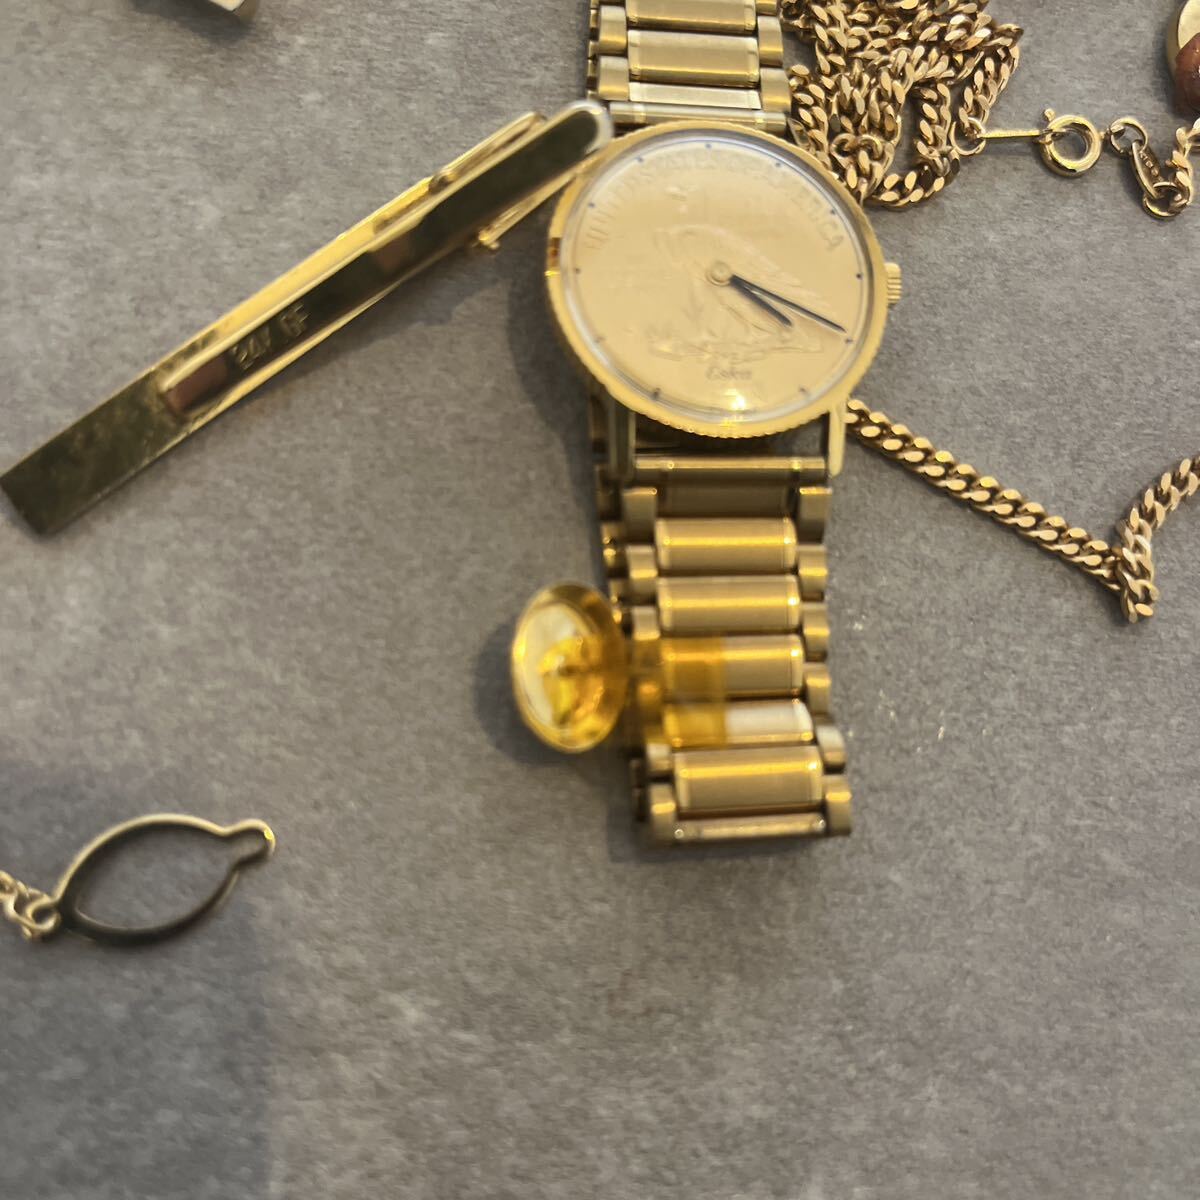  accessory set sale 18k stamp equipped EXPO 24k gf gp necklace cuffs clock gold genuineness unknown 